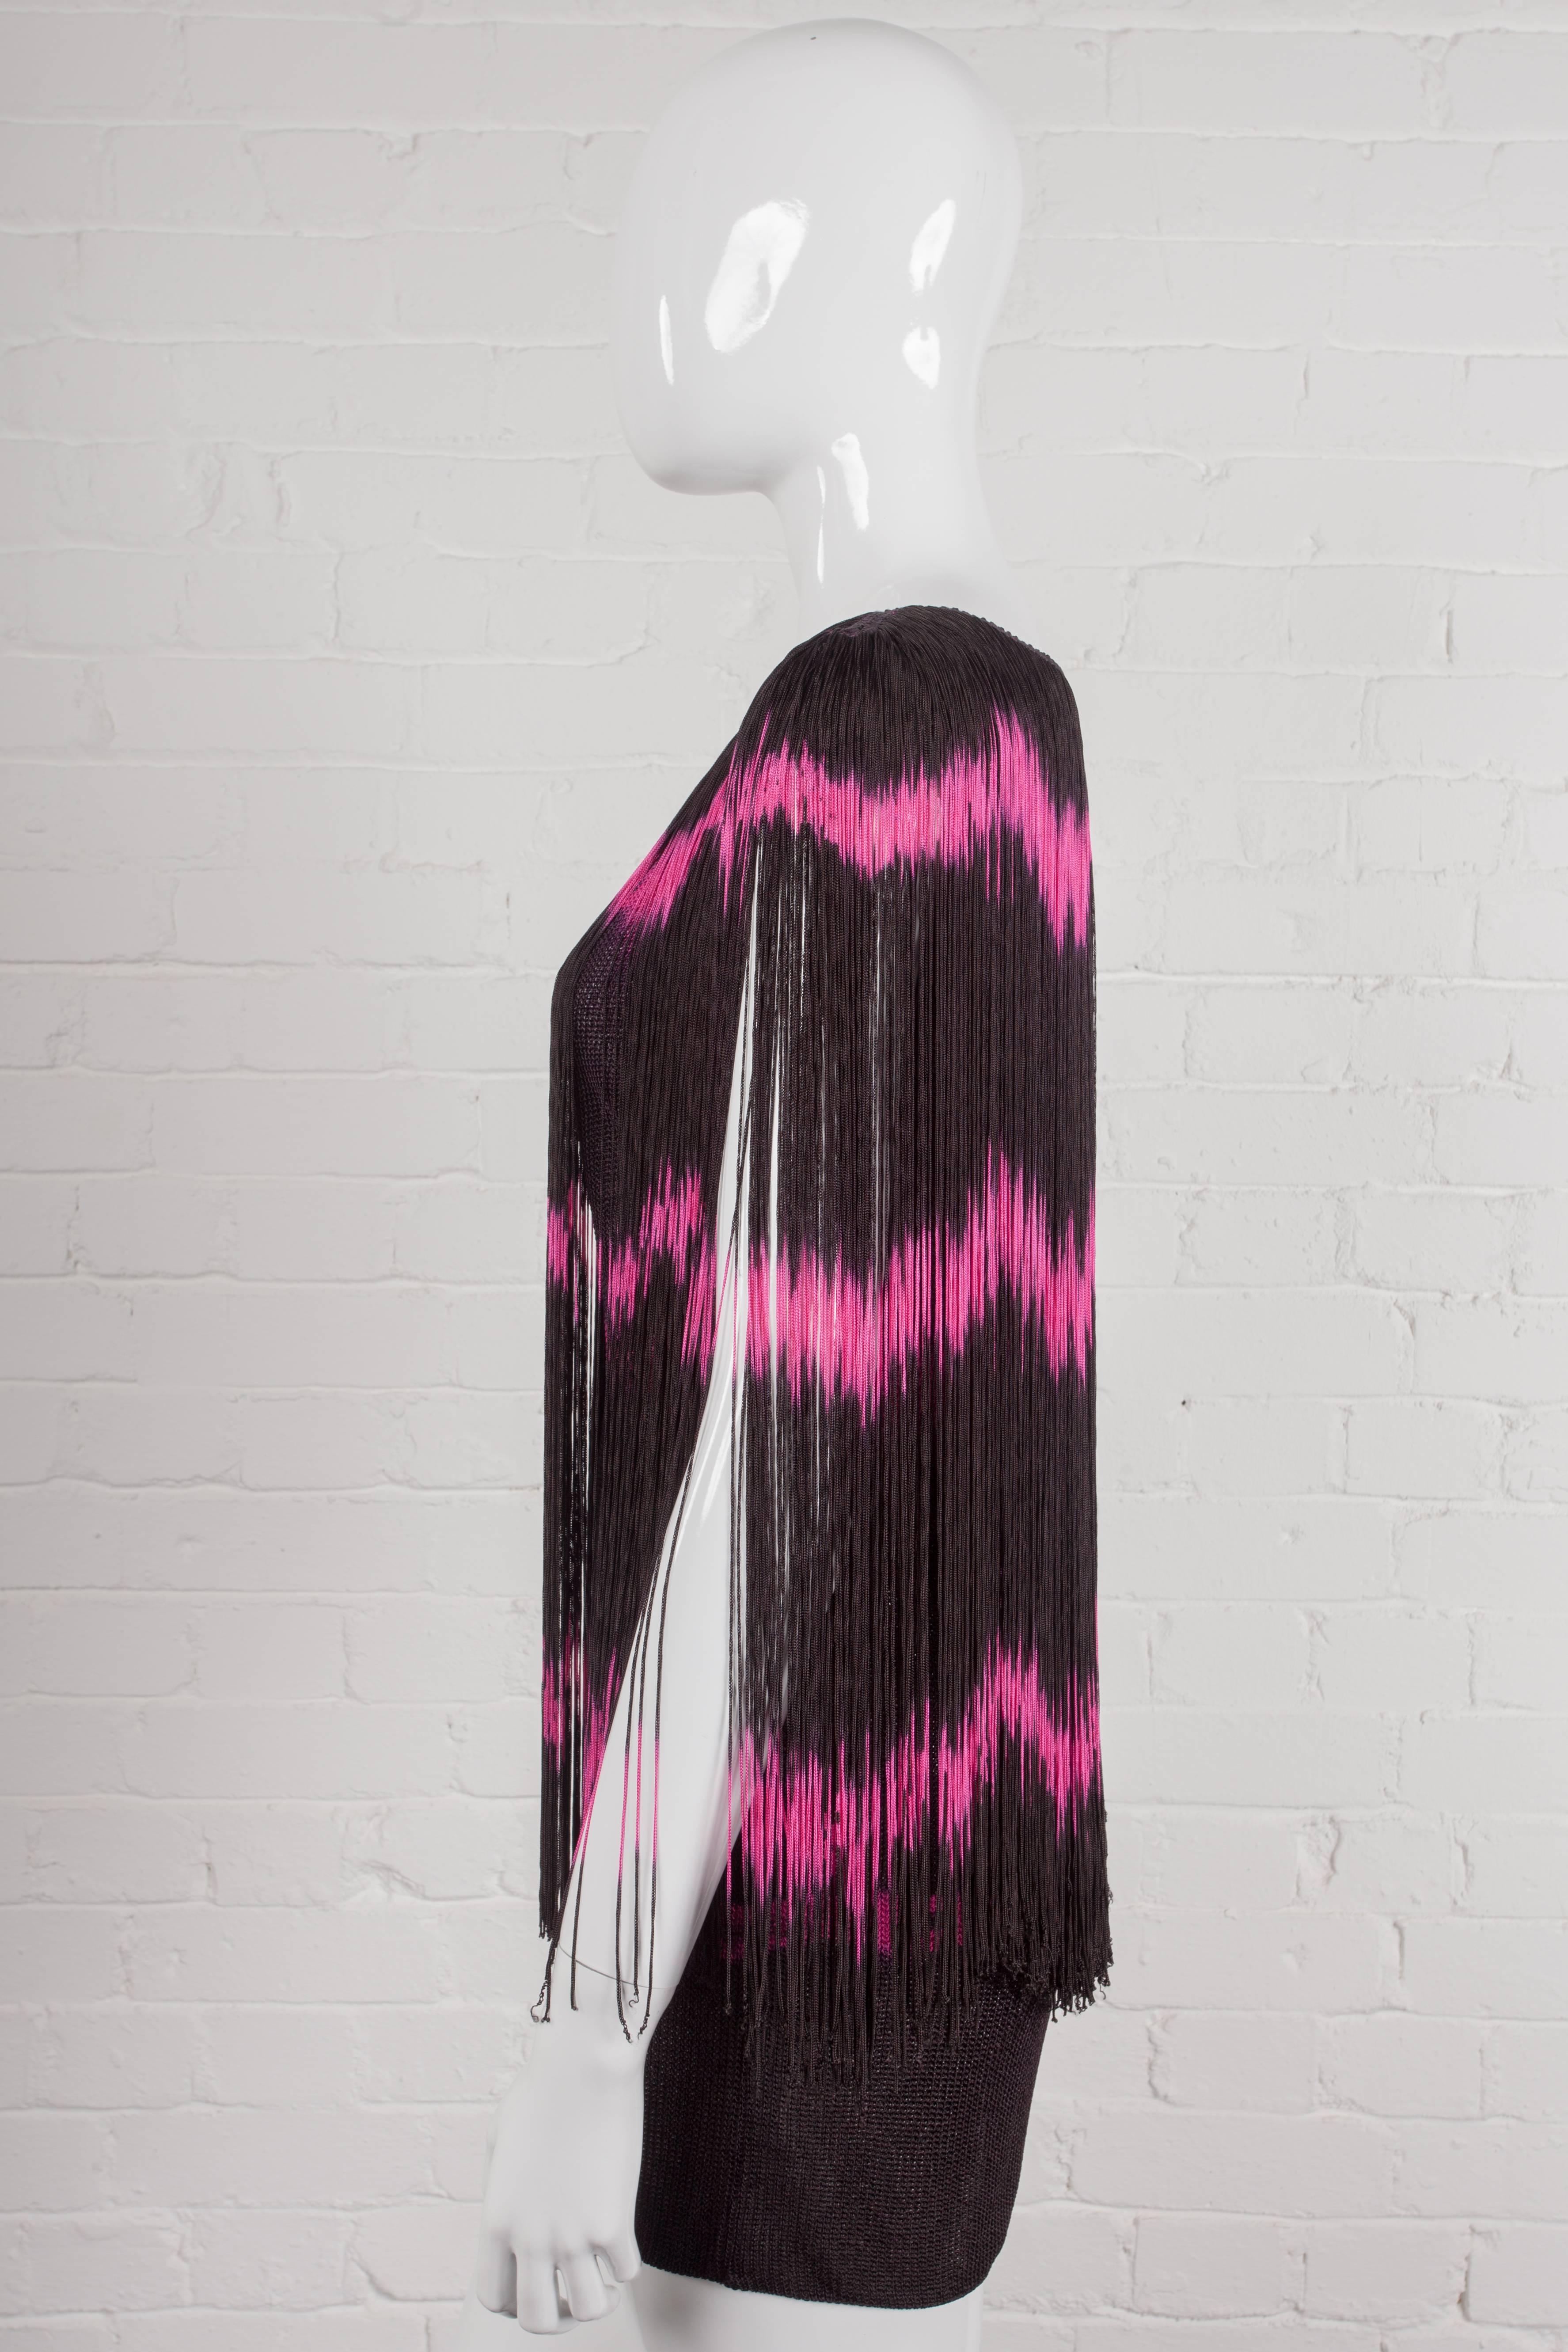 Fringed sleeveless tunic with a black and pink tie-dye effect design front and back. Made in a stretch viscose rayon material. From the Spring/Summer 1985 “A Wardrobe for Two” Collection.

Period: 1980s – Spring/Summer 1985

Origin: